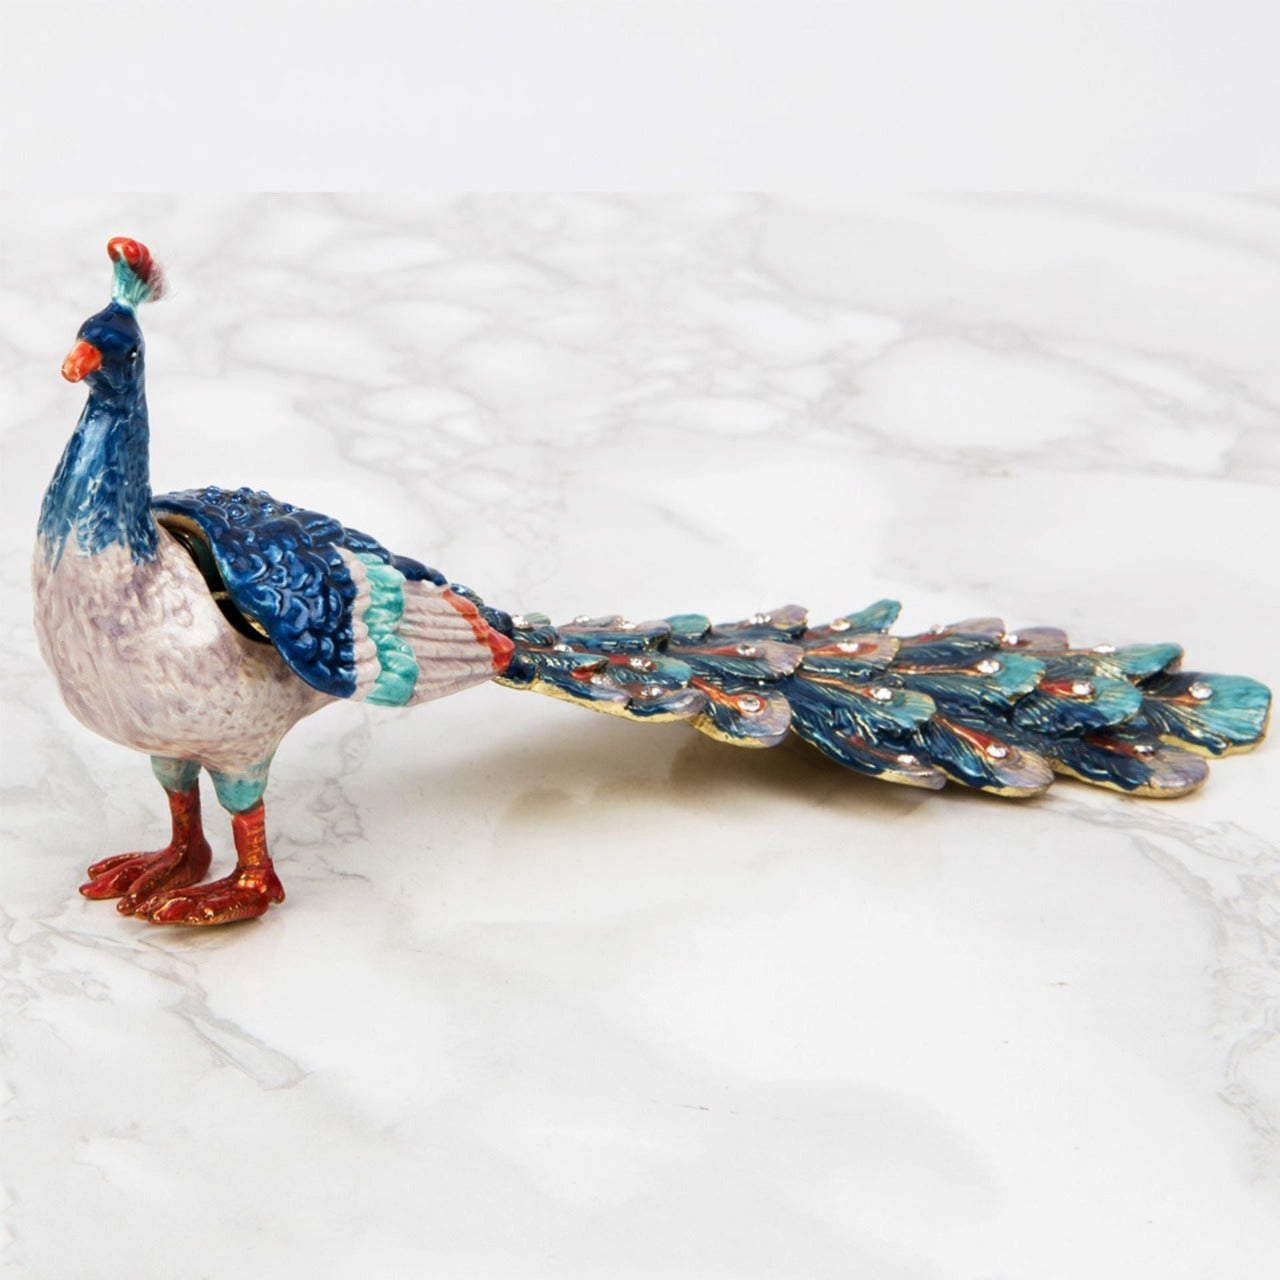 Treasured Trinkets - Peacock  A beautiful, hand painted and crystal finished peacock trinket box from Treasured Trinkets.  Painted with gorgeous blue plumage, this colourful trinket box is a wonderful ornament to complement a mantelpiece, bookcase or cabinet.